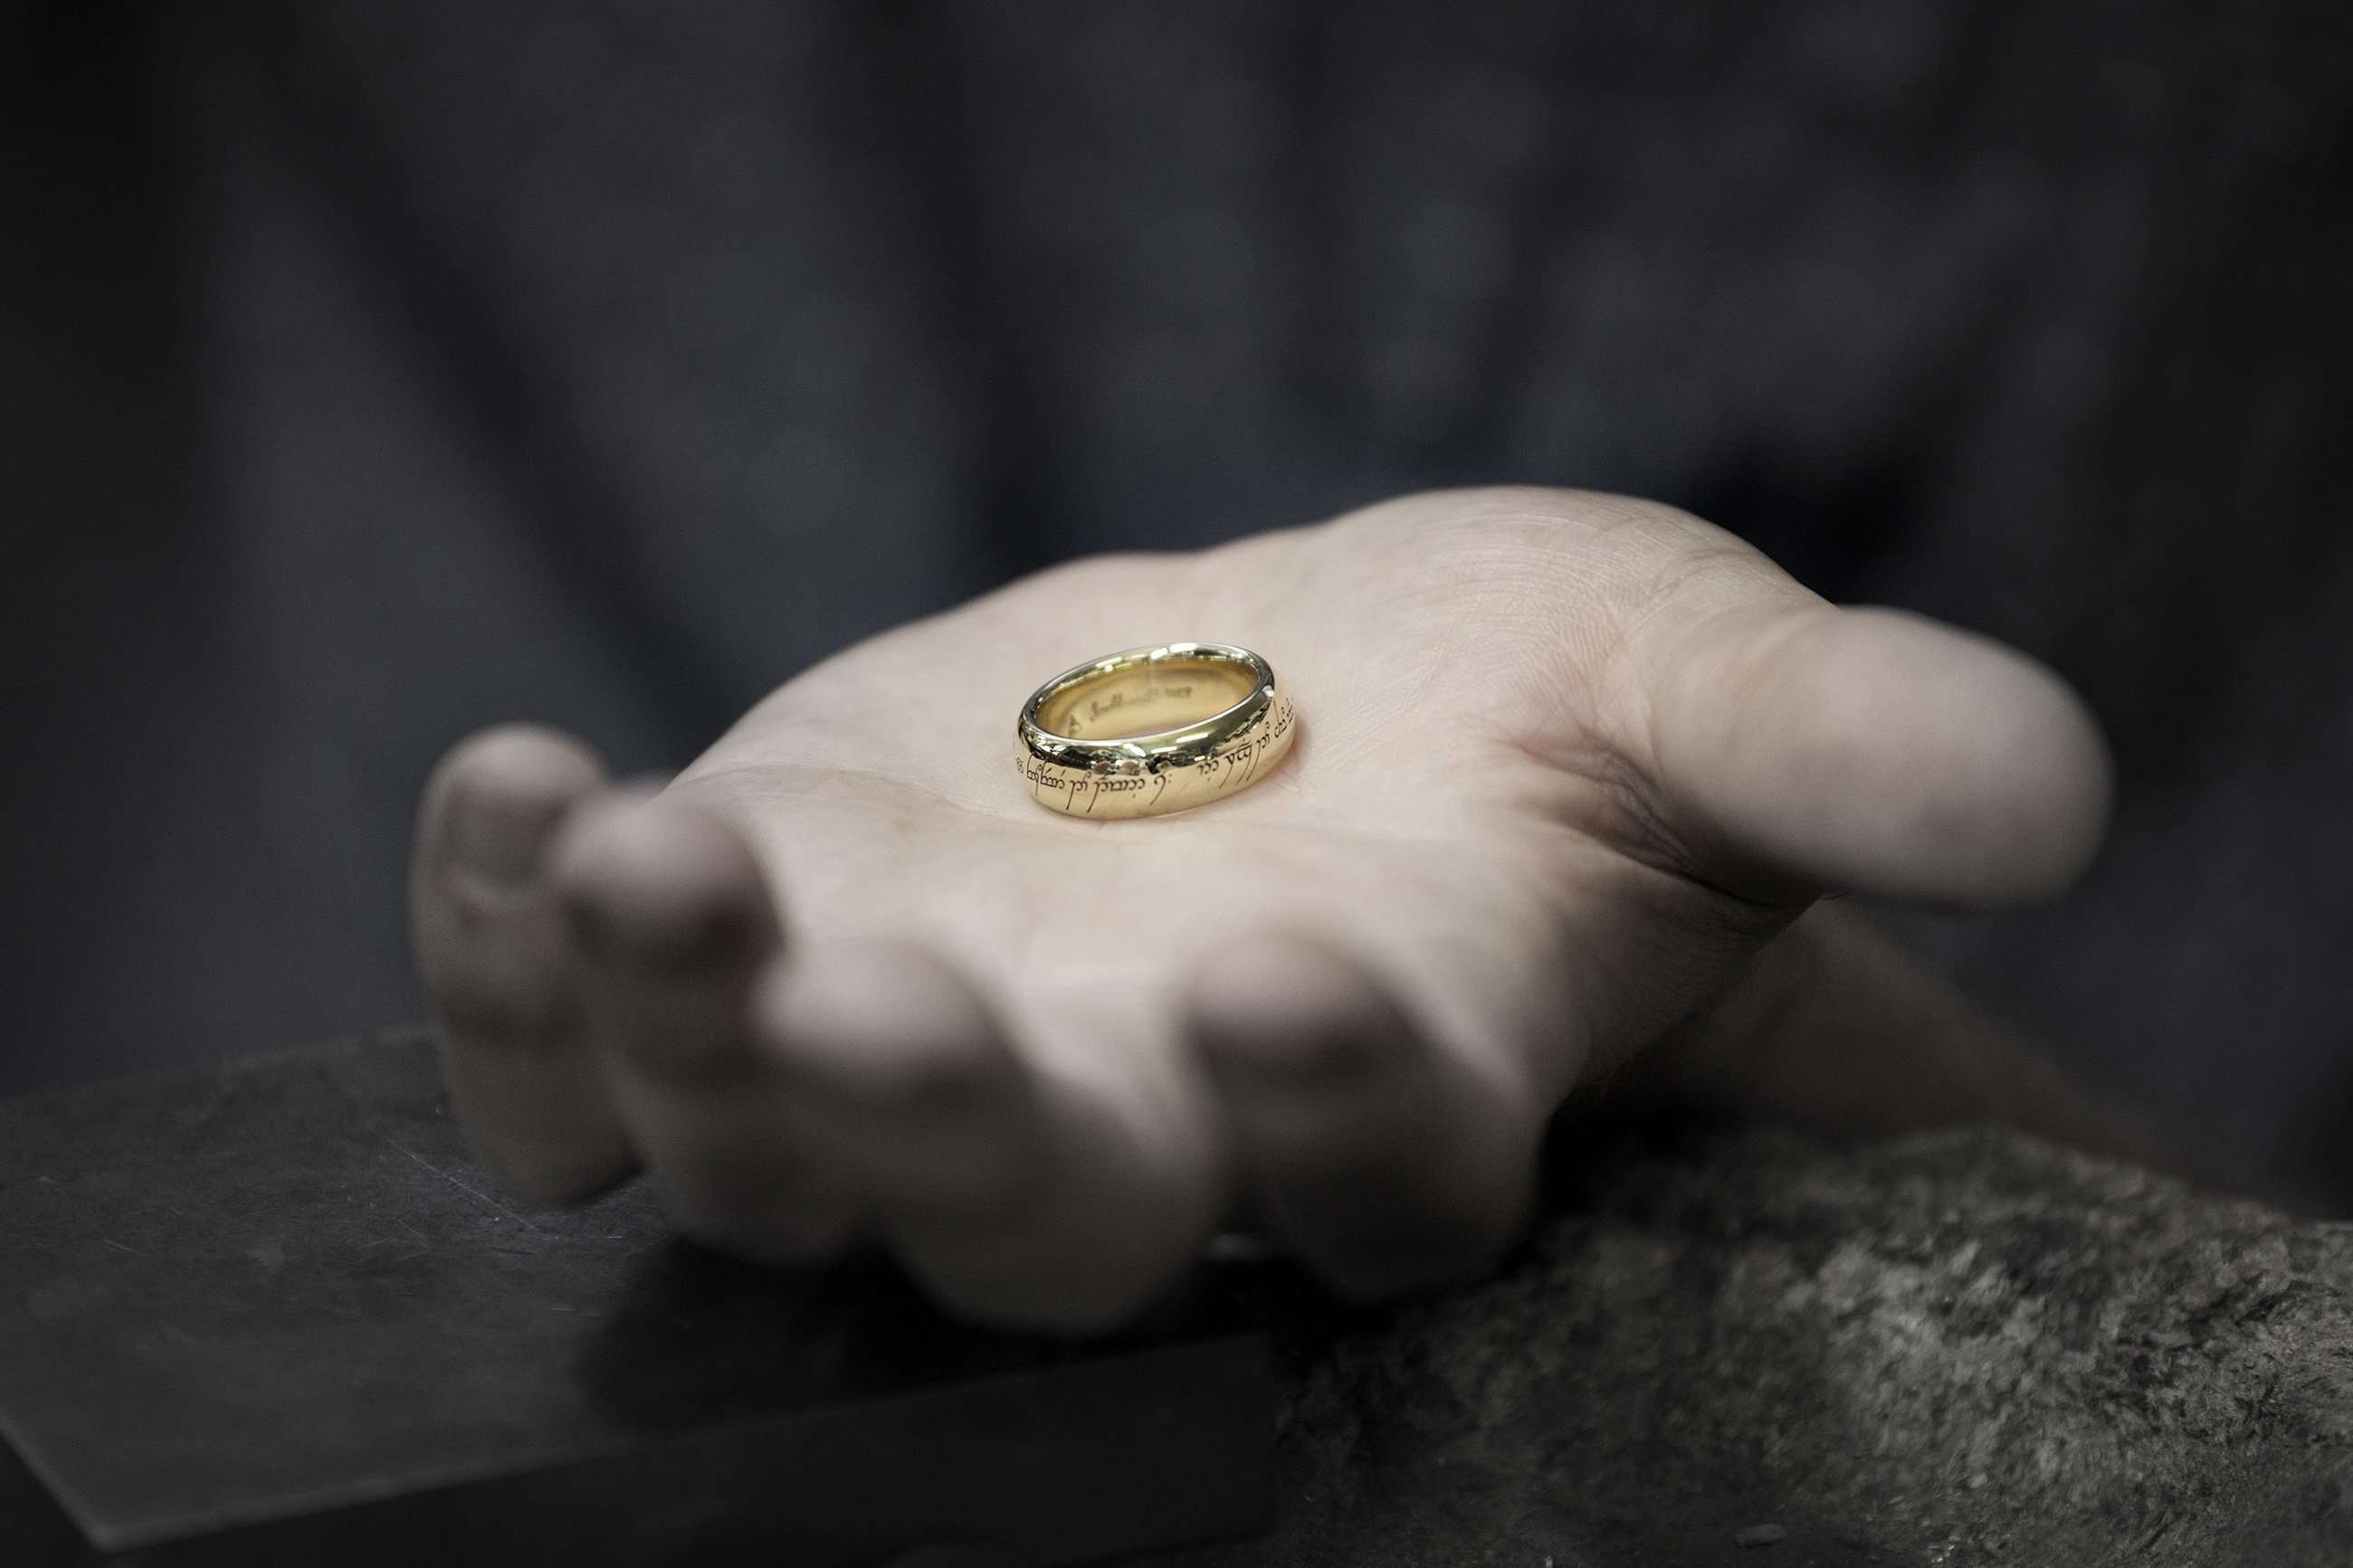 Lord of the Rings' ring was made by a jeweler who died just before